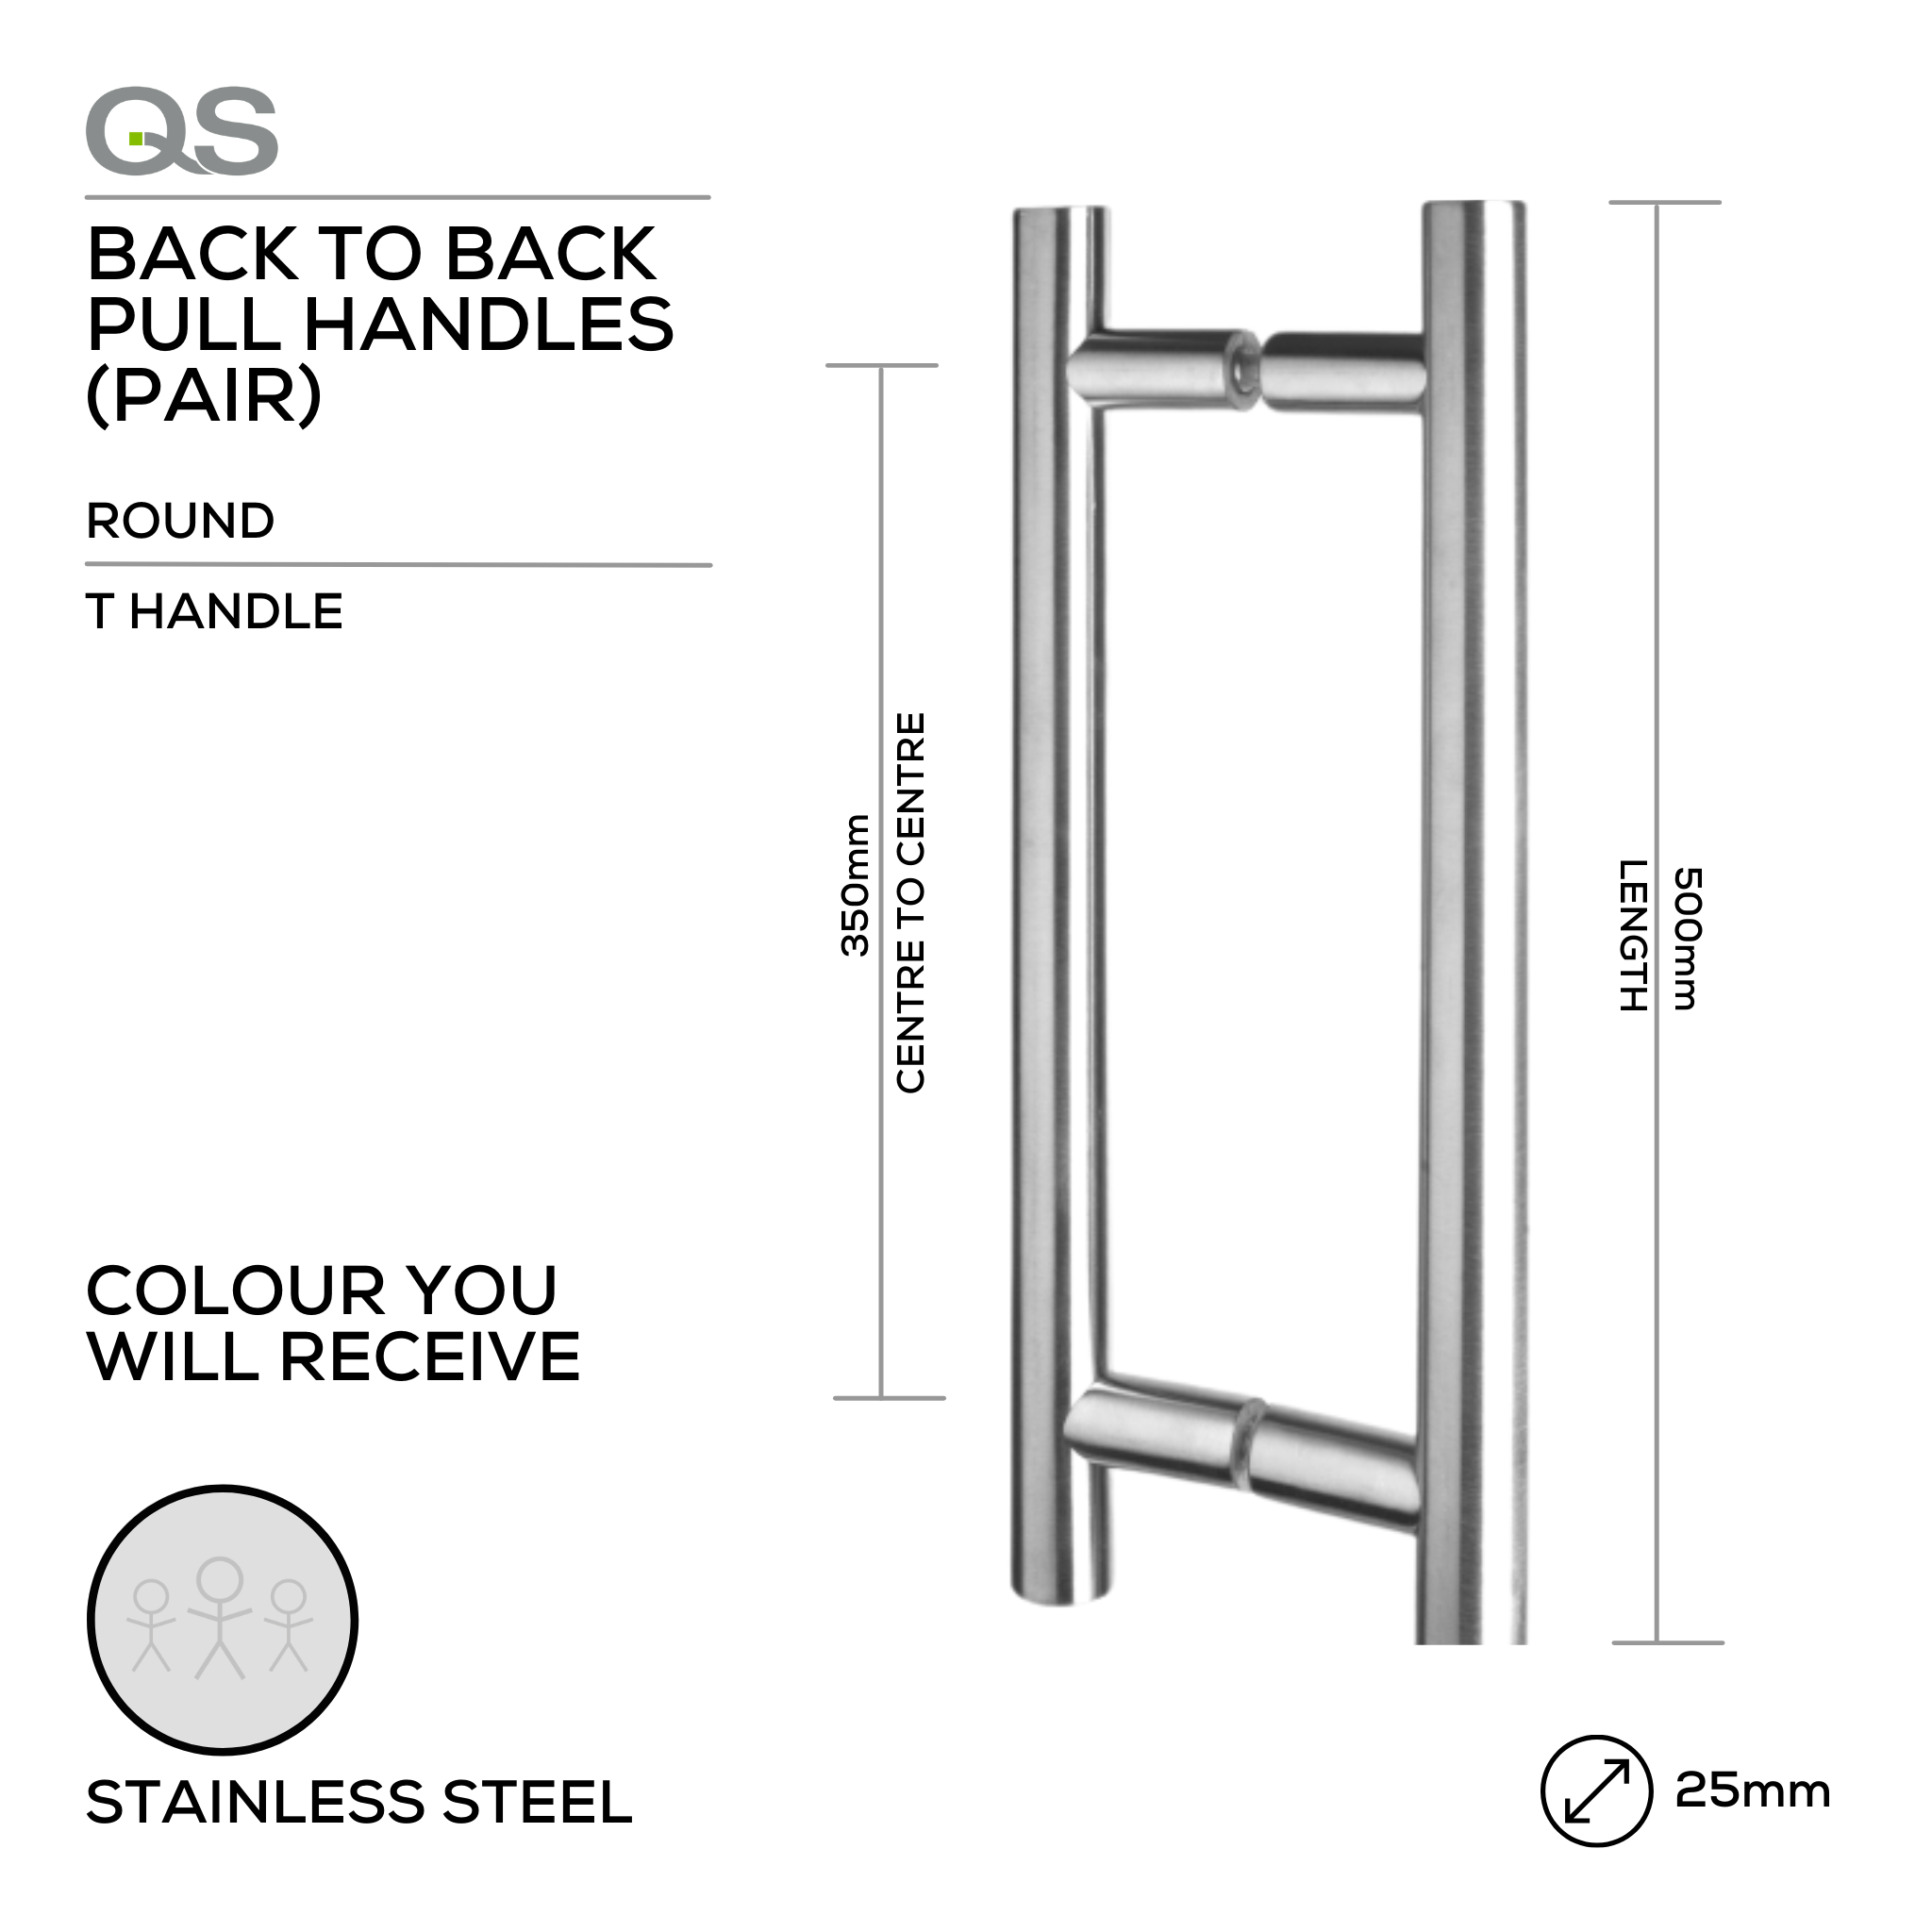 QS2502 T Handle, Pull Handle, Round, T Handle, BTB, 25mm (Ø) x 500mm (l) x 350mm (ctc), Stainless Steel, QS